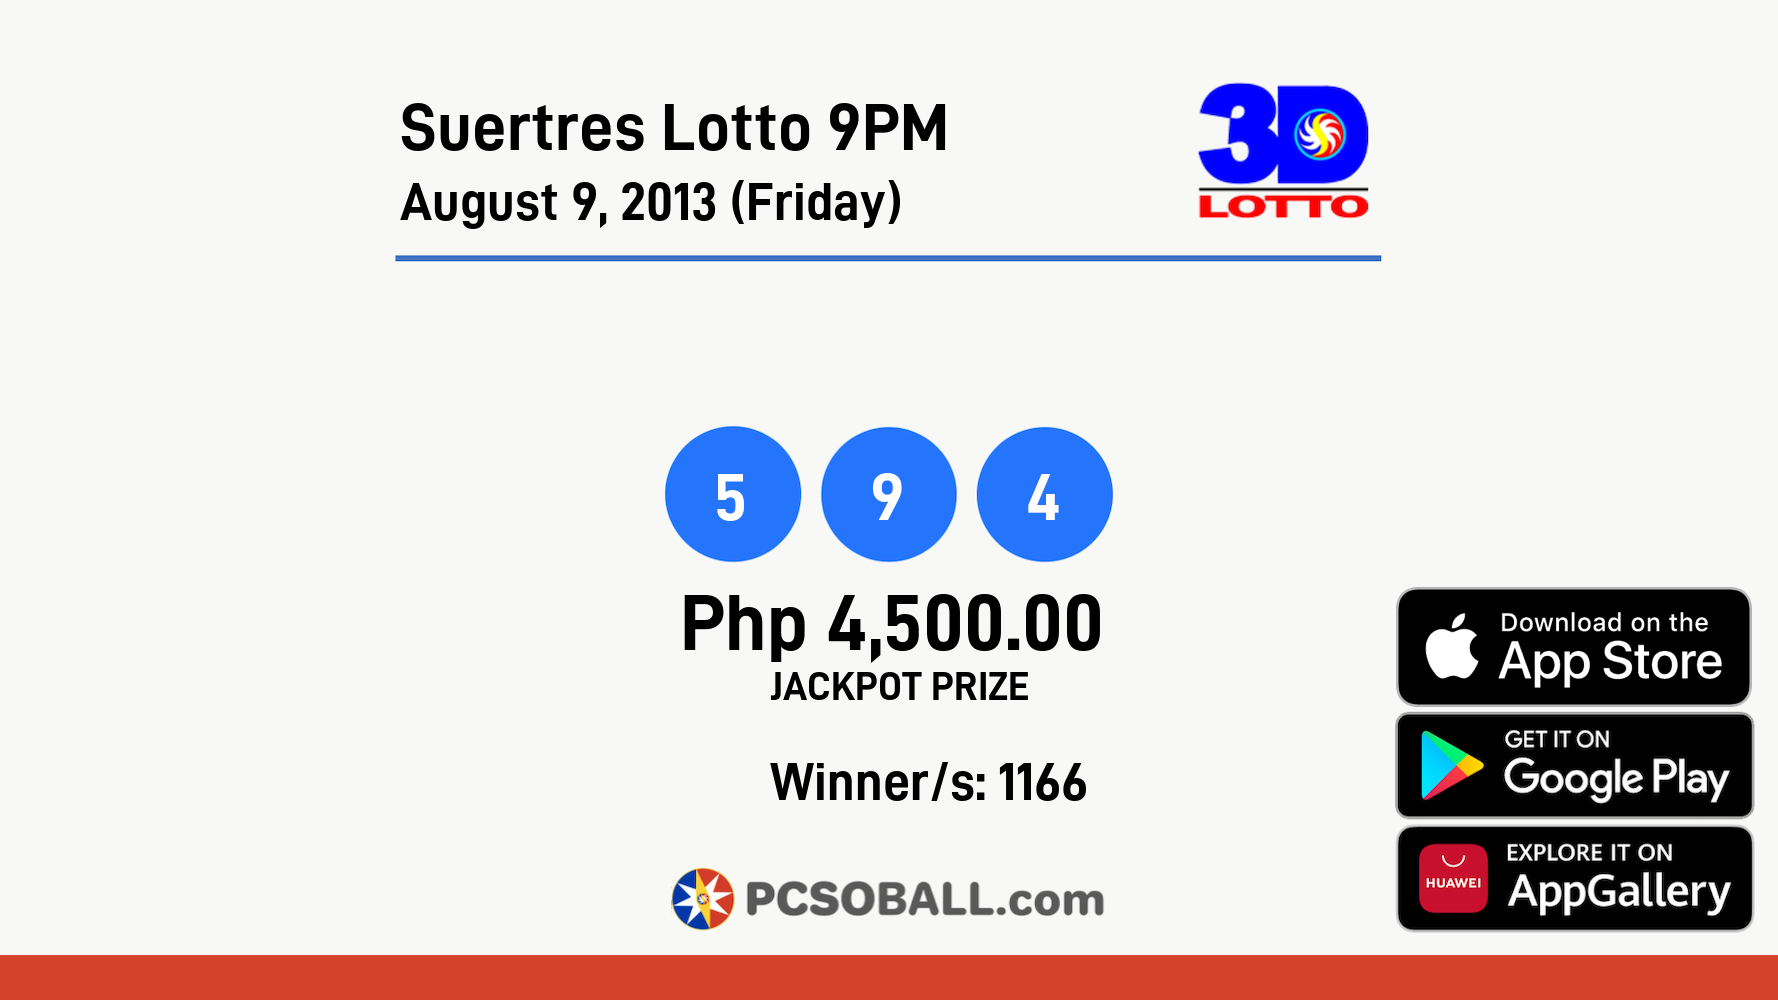 Suertres Lotto 9PM August 9, 2013 (Friday) Result